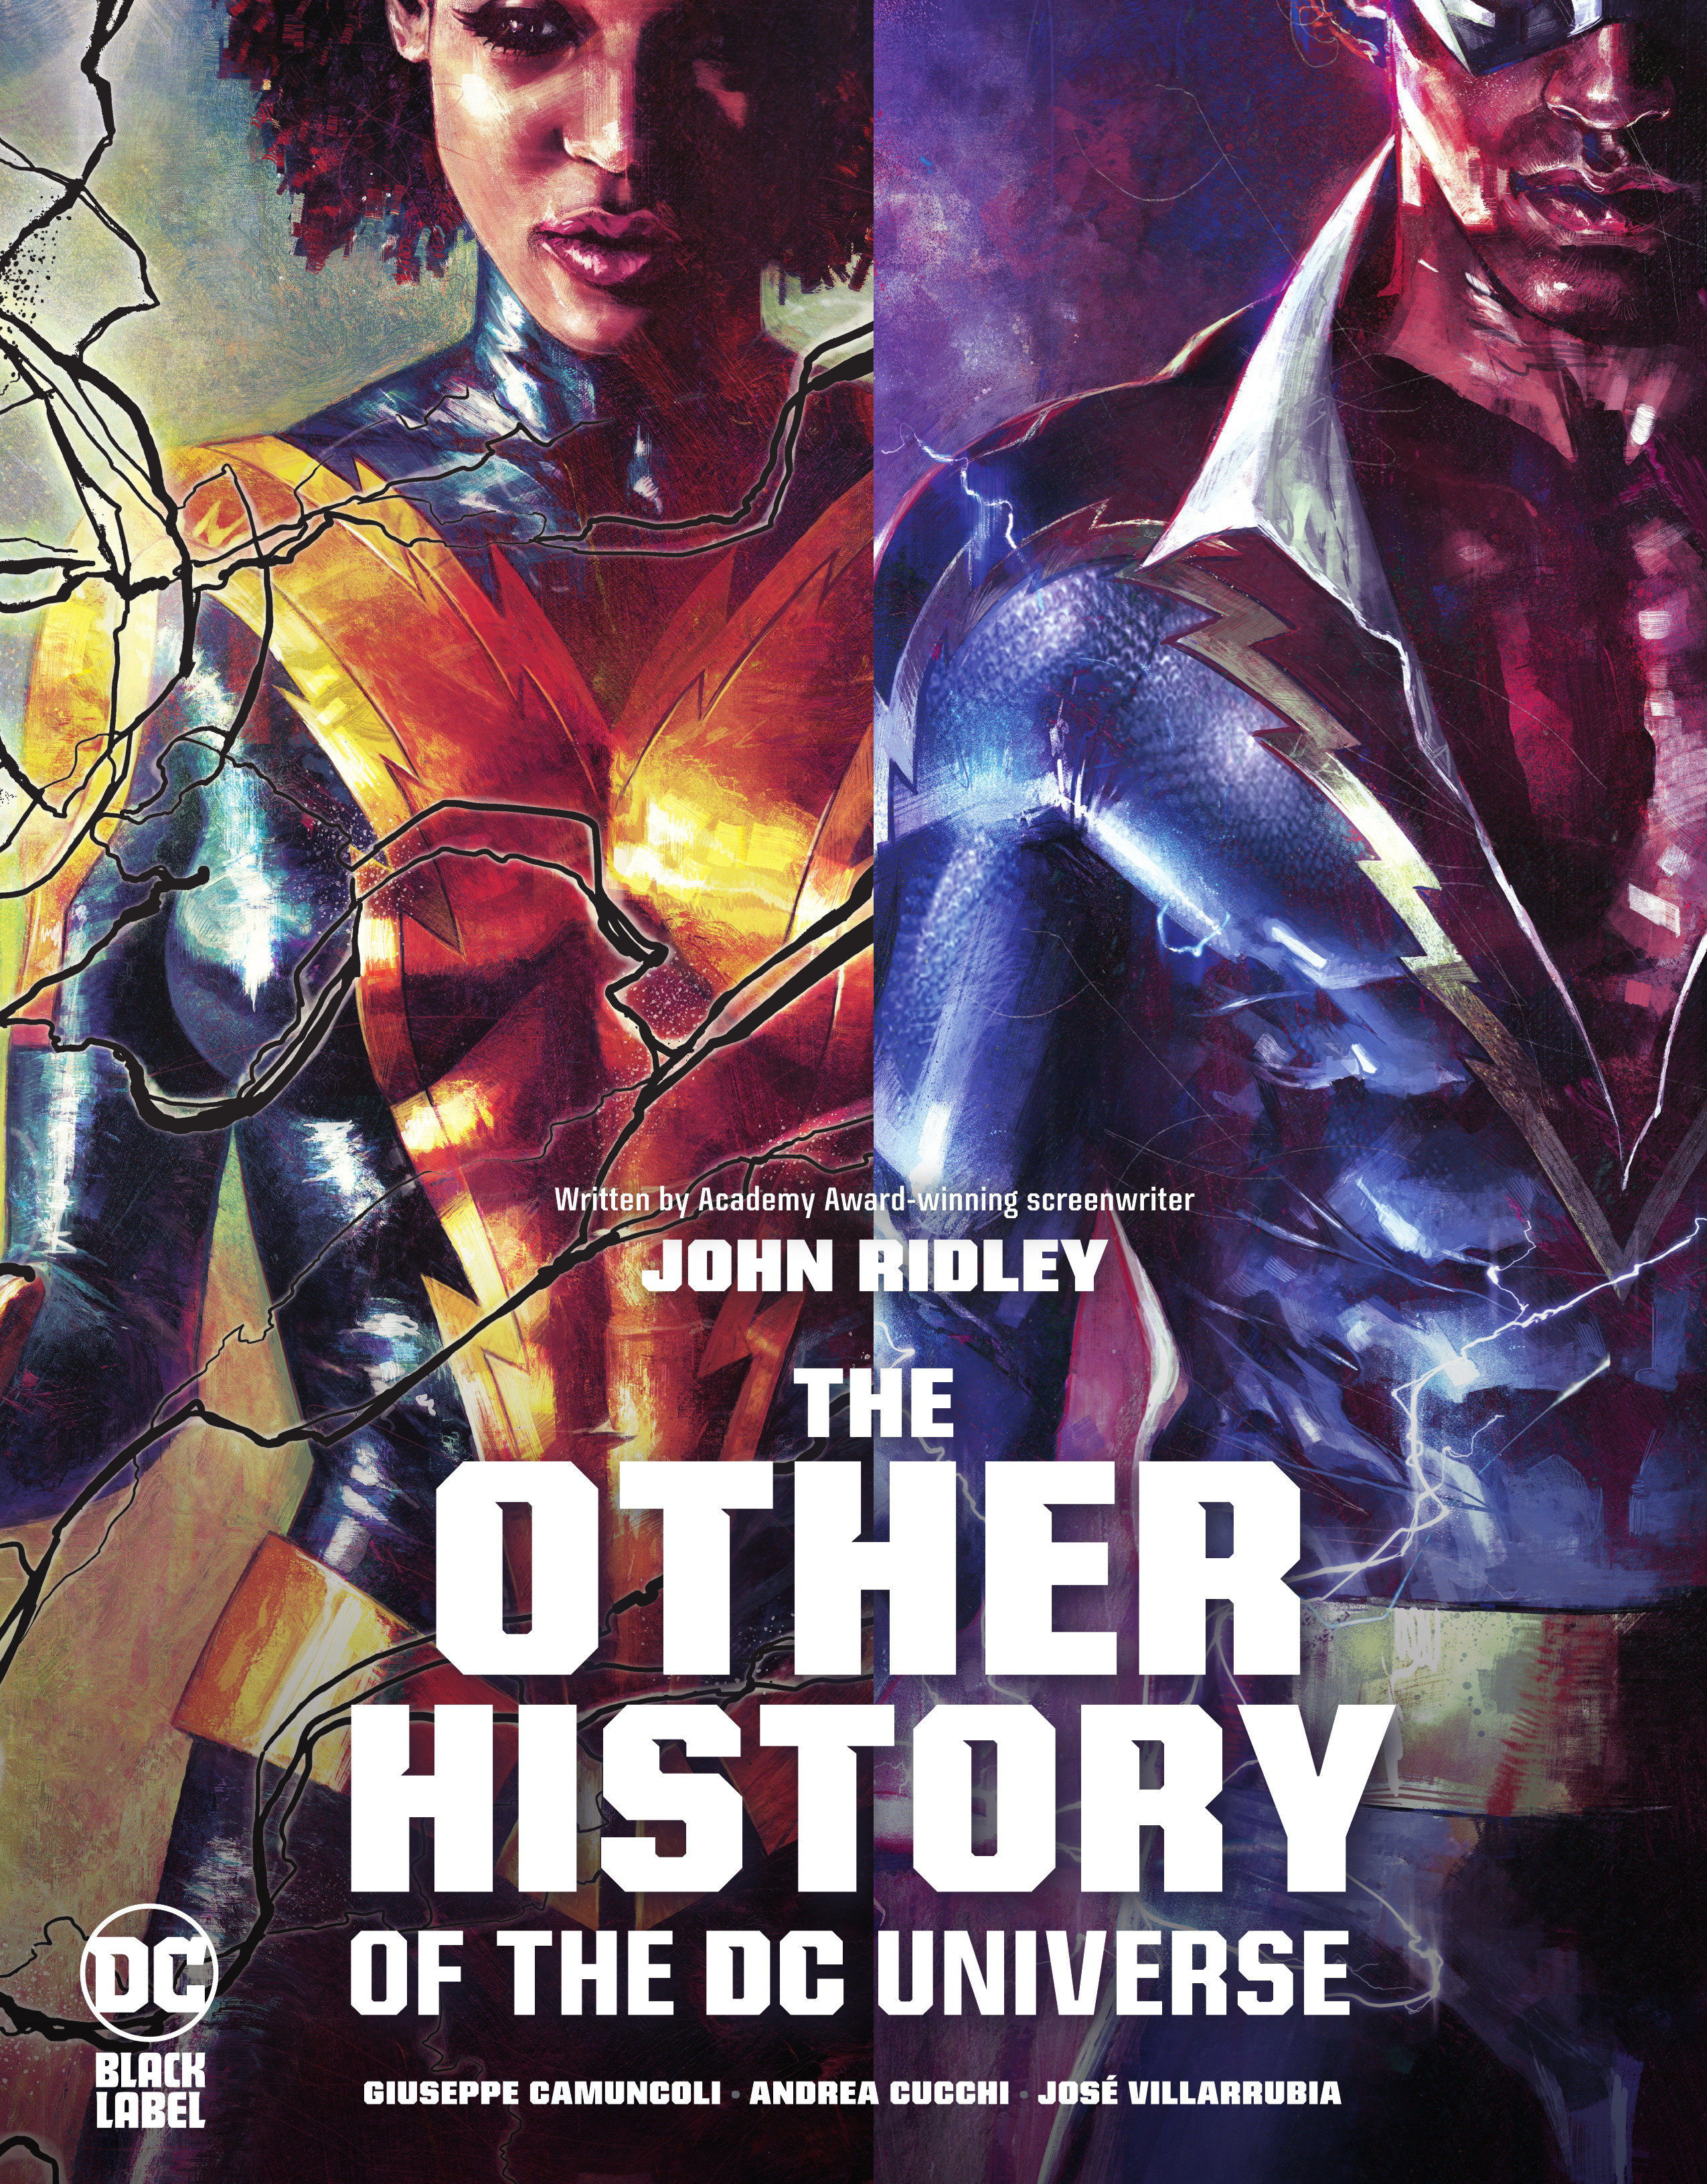 Other History of the DC Universe Graphic Novel (Mature)